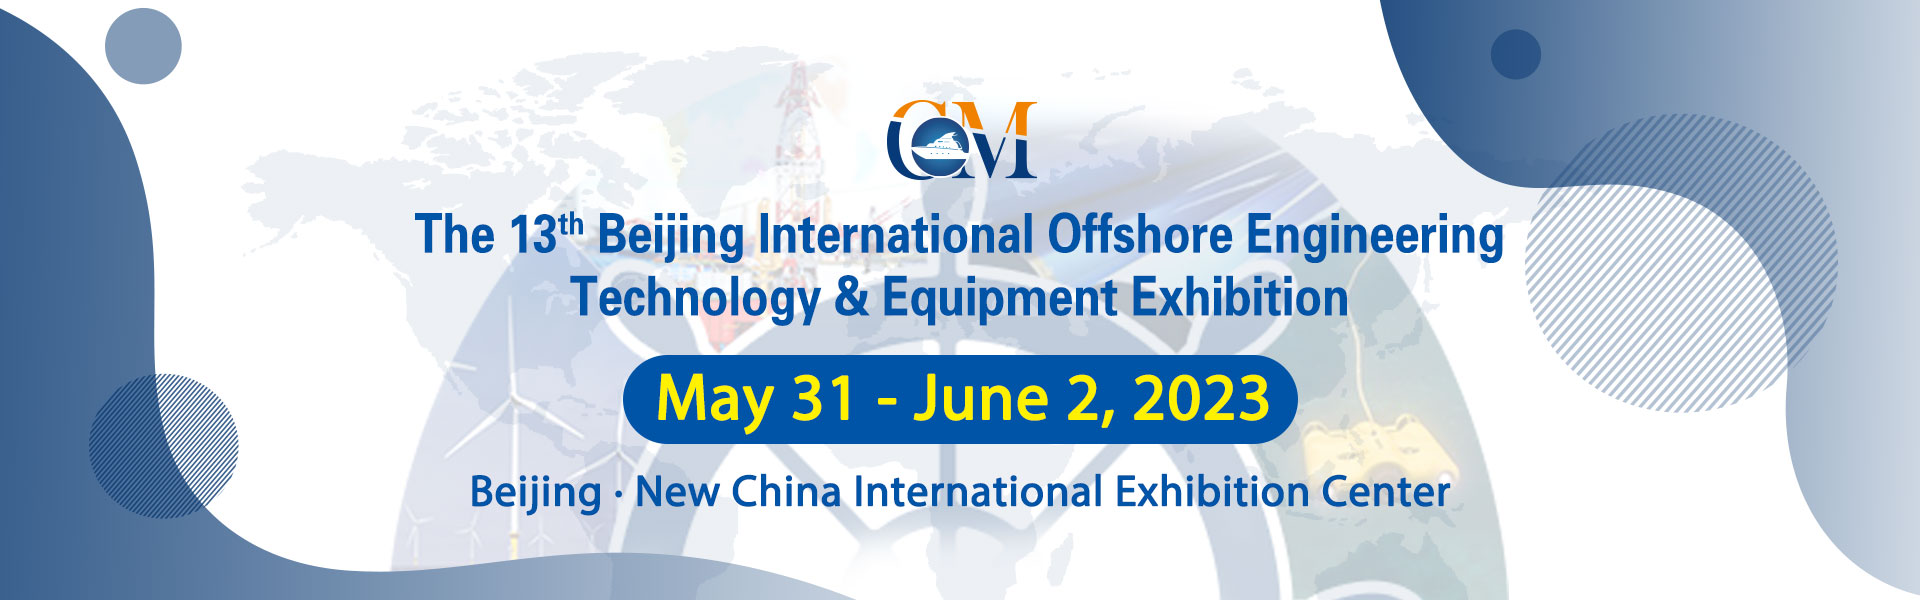 Offshore Engineering Technology & Equipment Exhibition